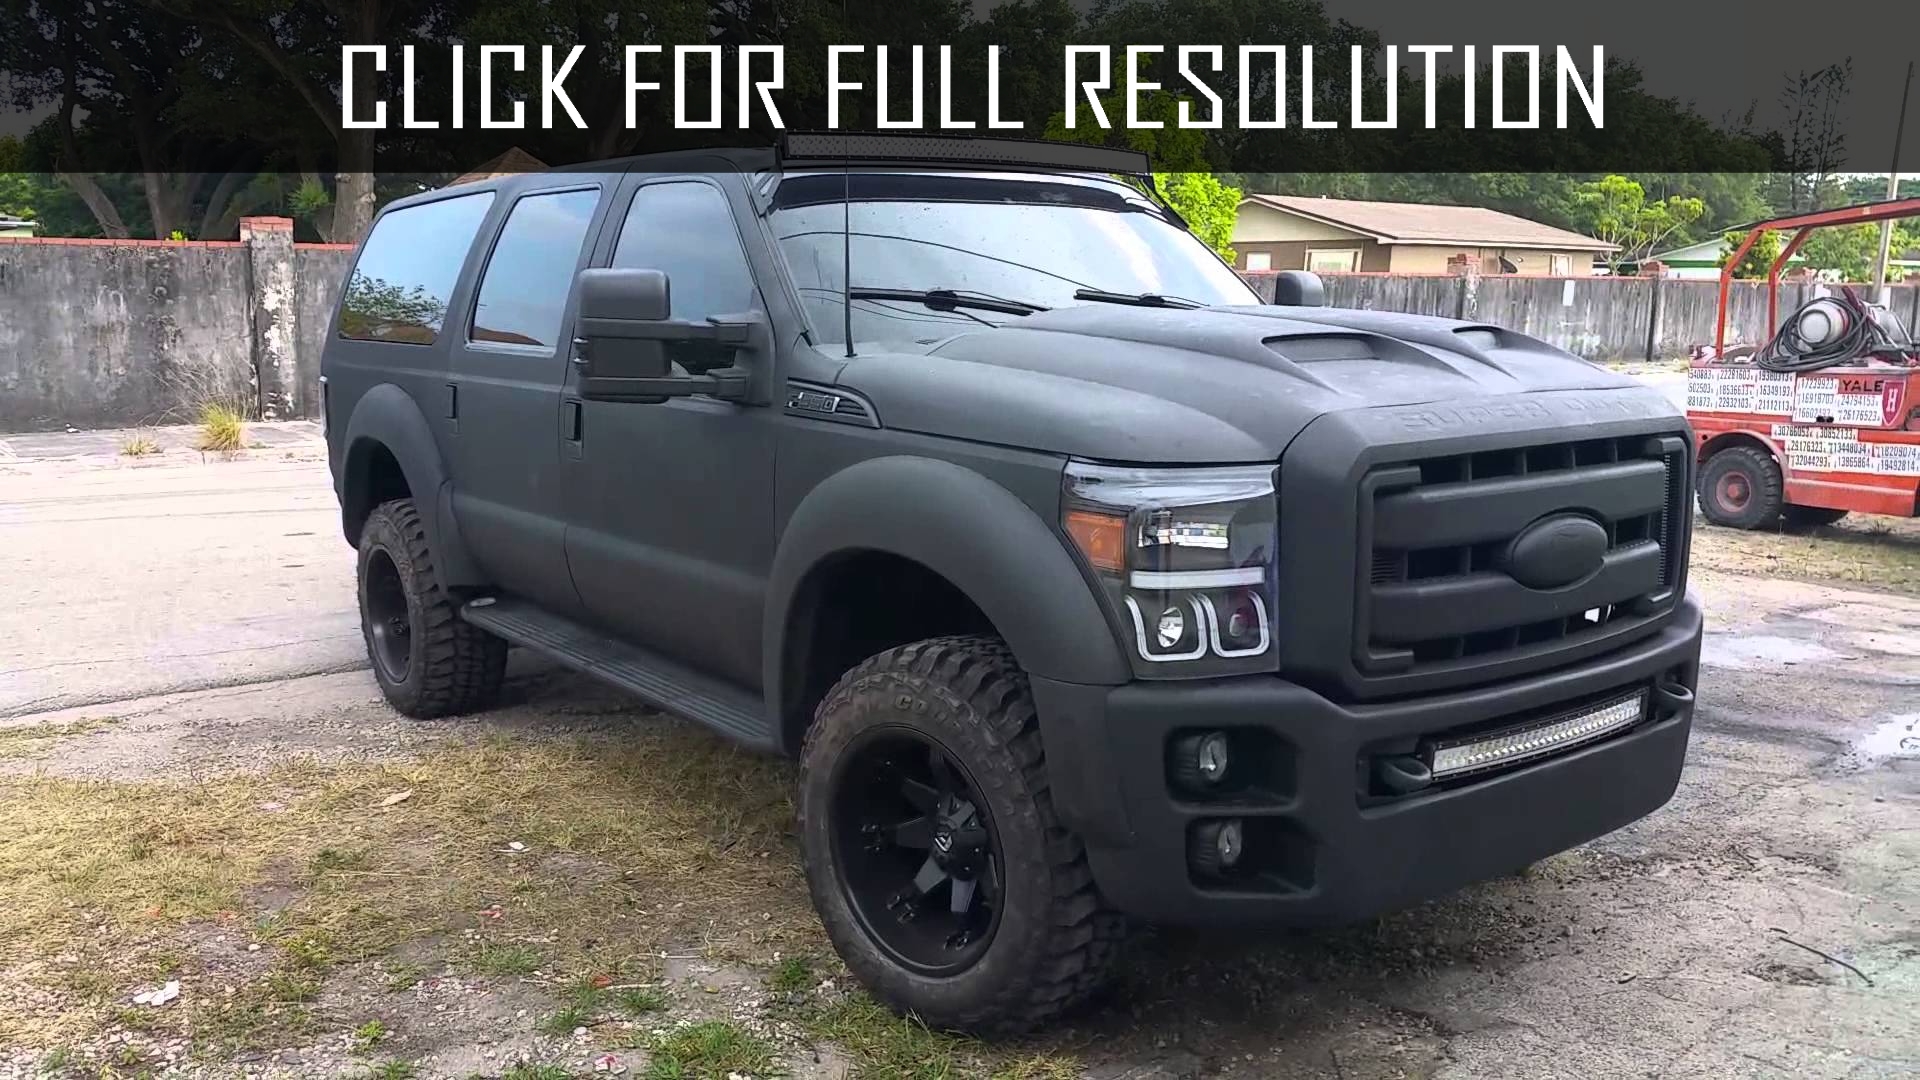 Ford Excursion 2015